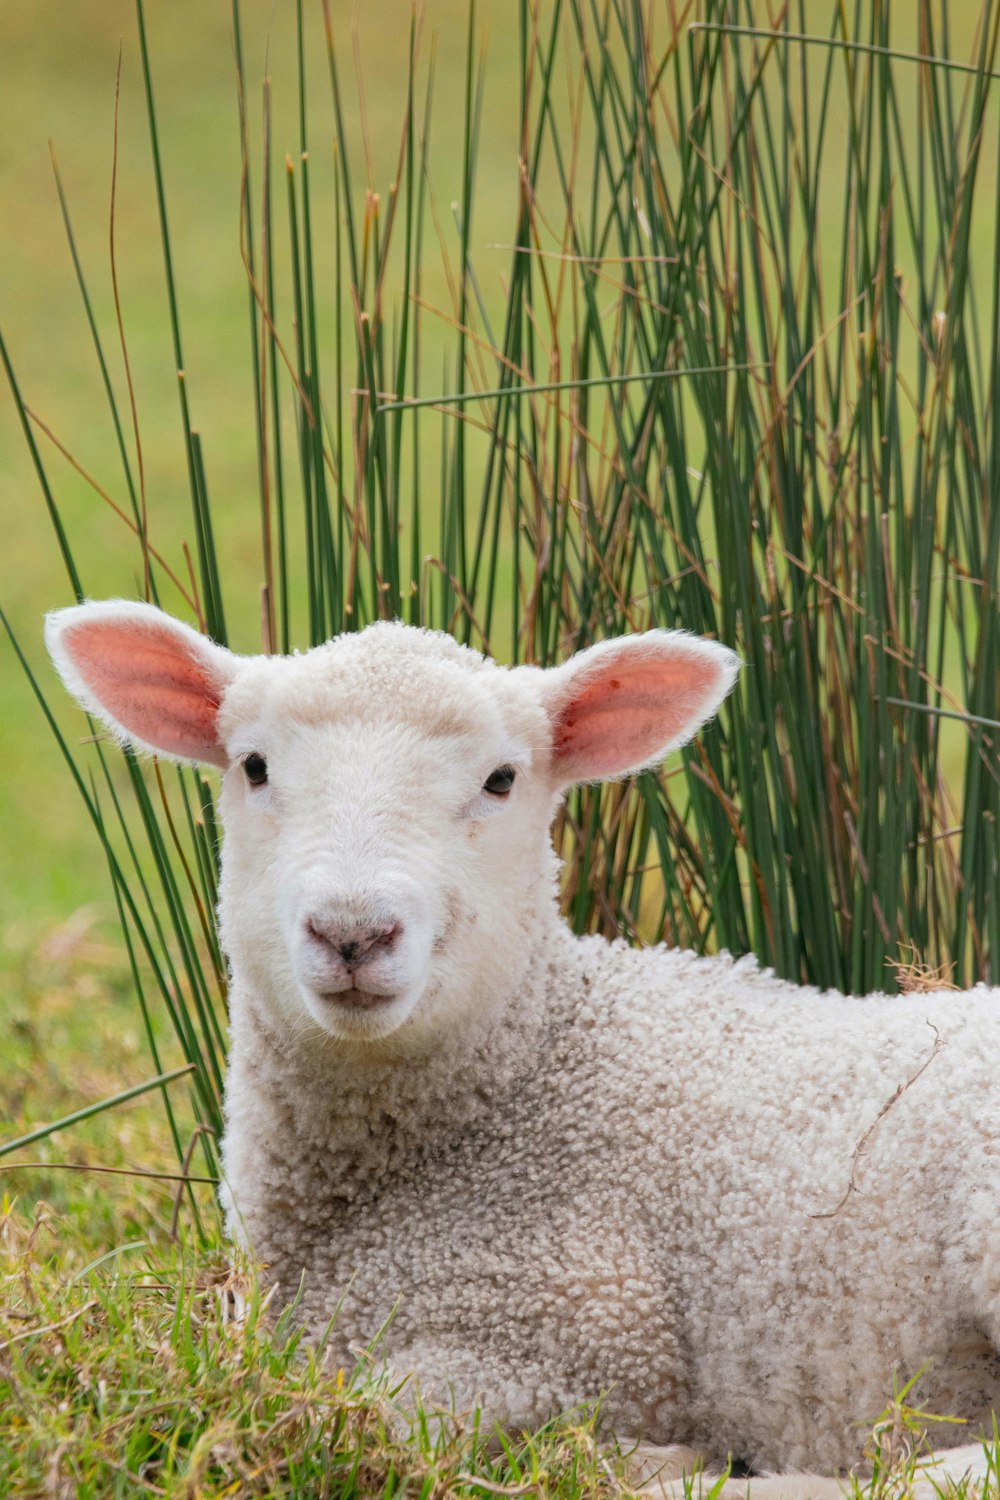 a sheep laying in the grass next to some tall grass